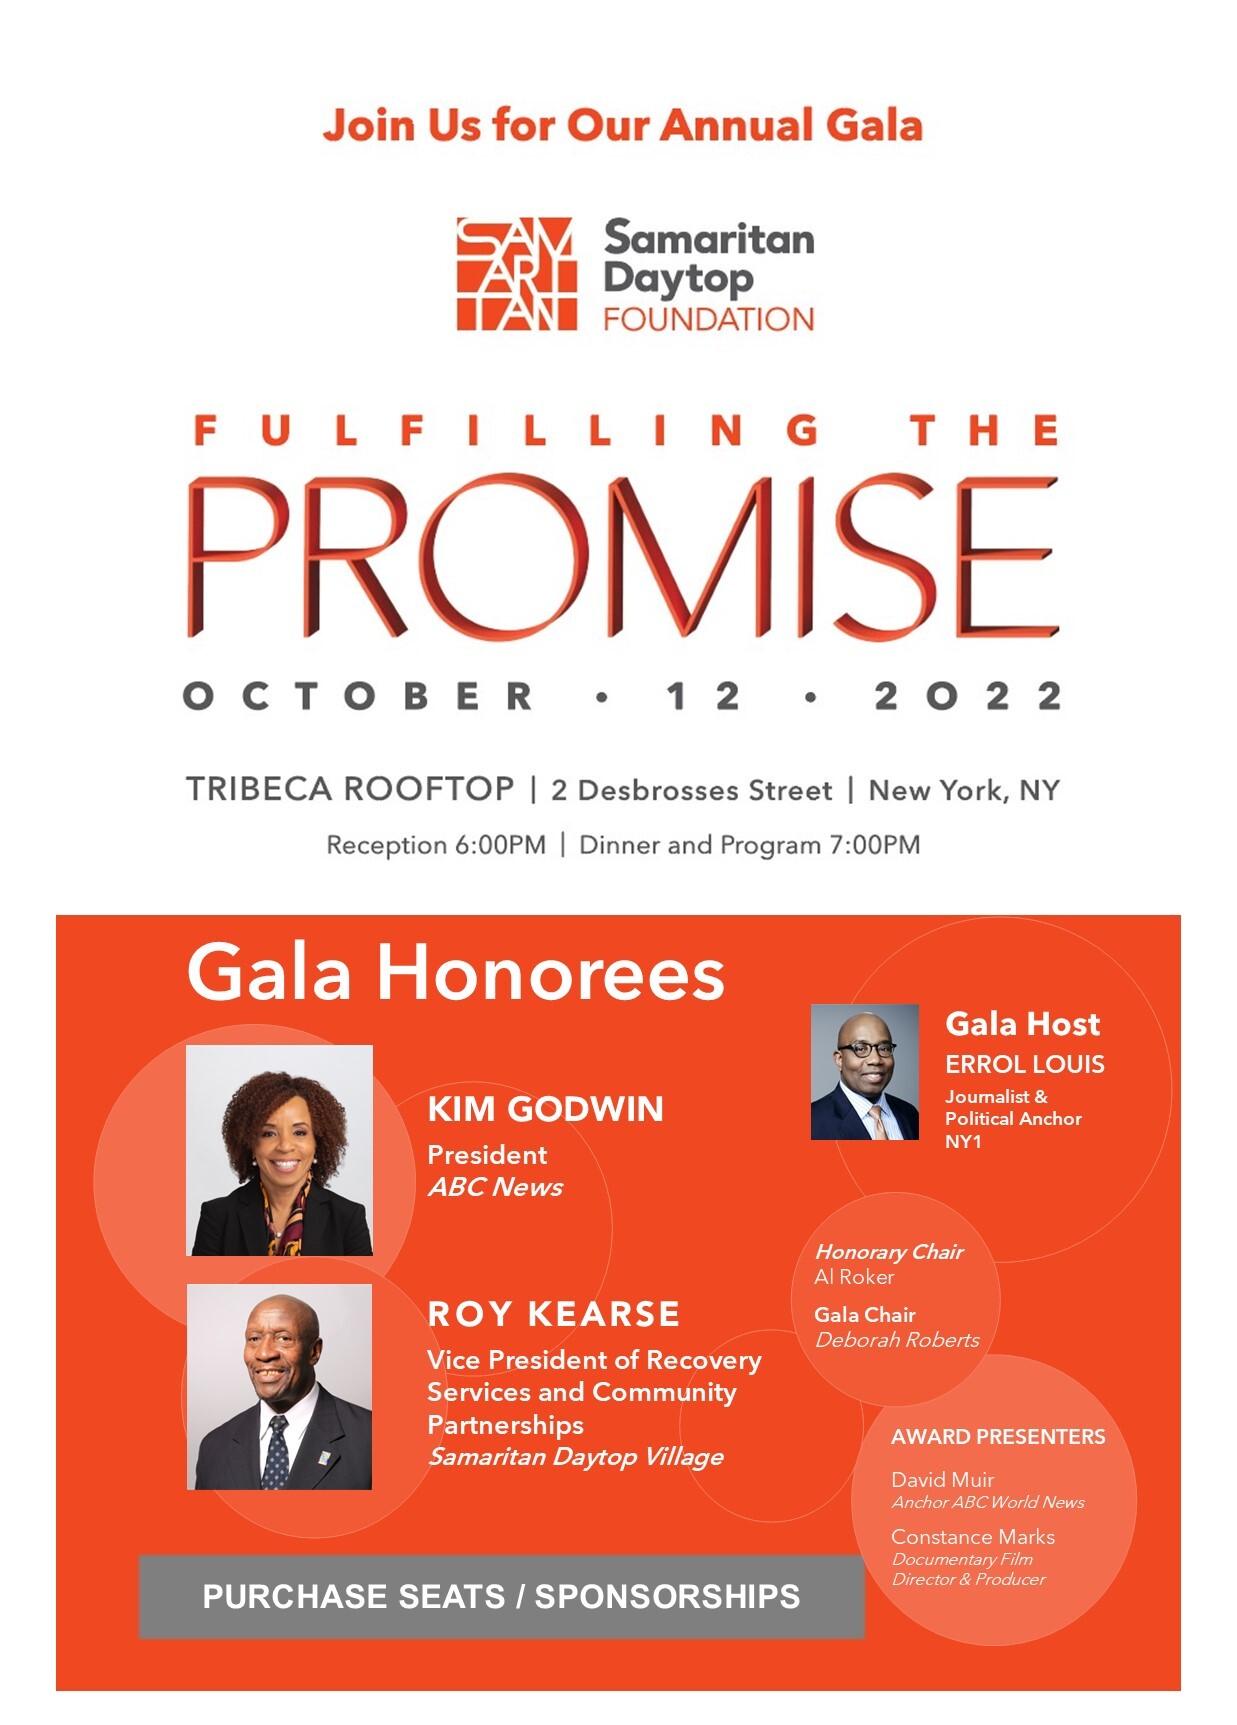 Join Samaritan Daytop Foundation for Our Annual Gala: Fulfilliing the Promise. October 12, 2022. Tribeca Rooftop 2 Desbrosses Street, New York, NY. Reception 6pm. Dinner and Program 7pm.